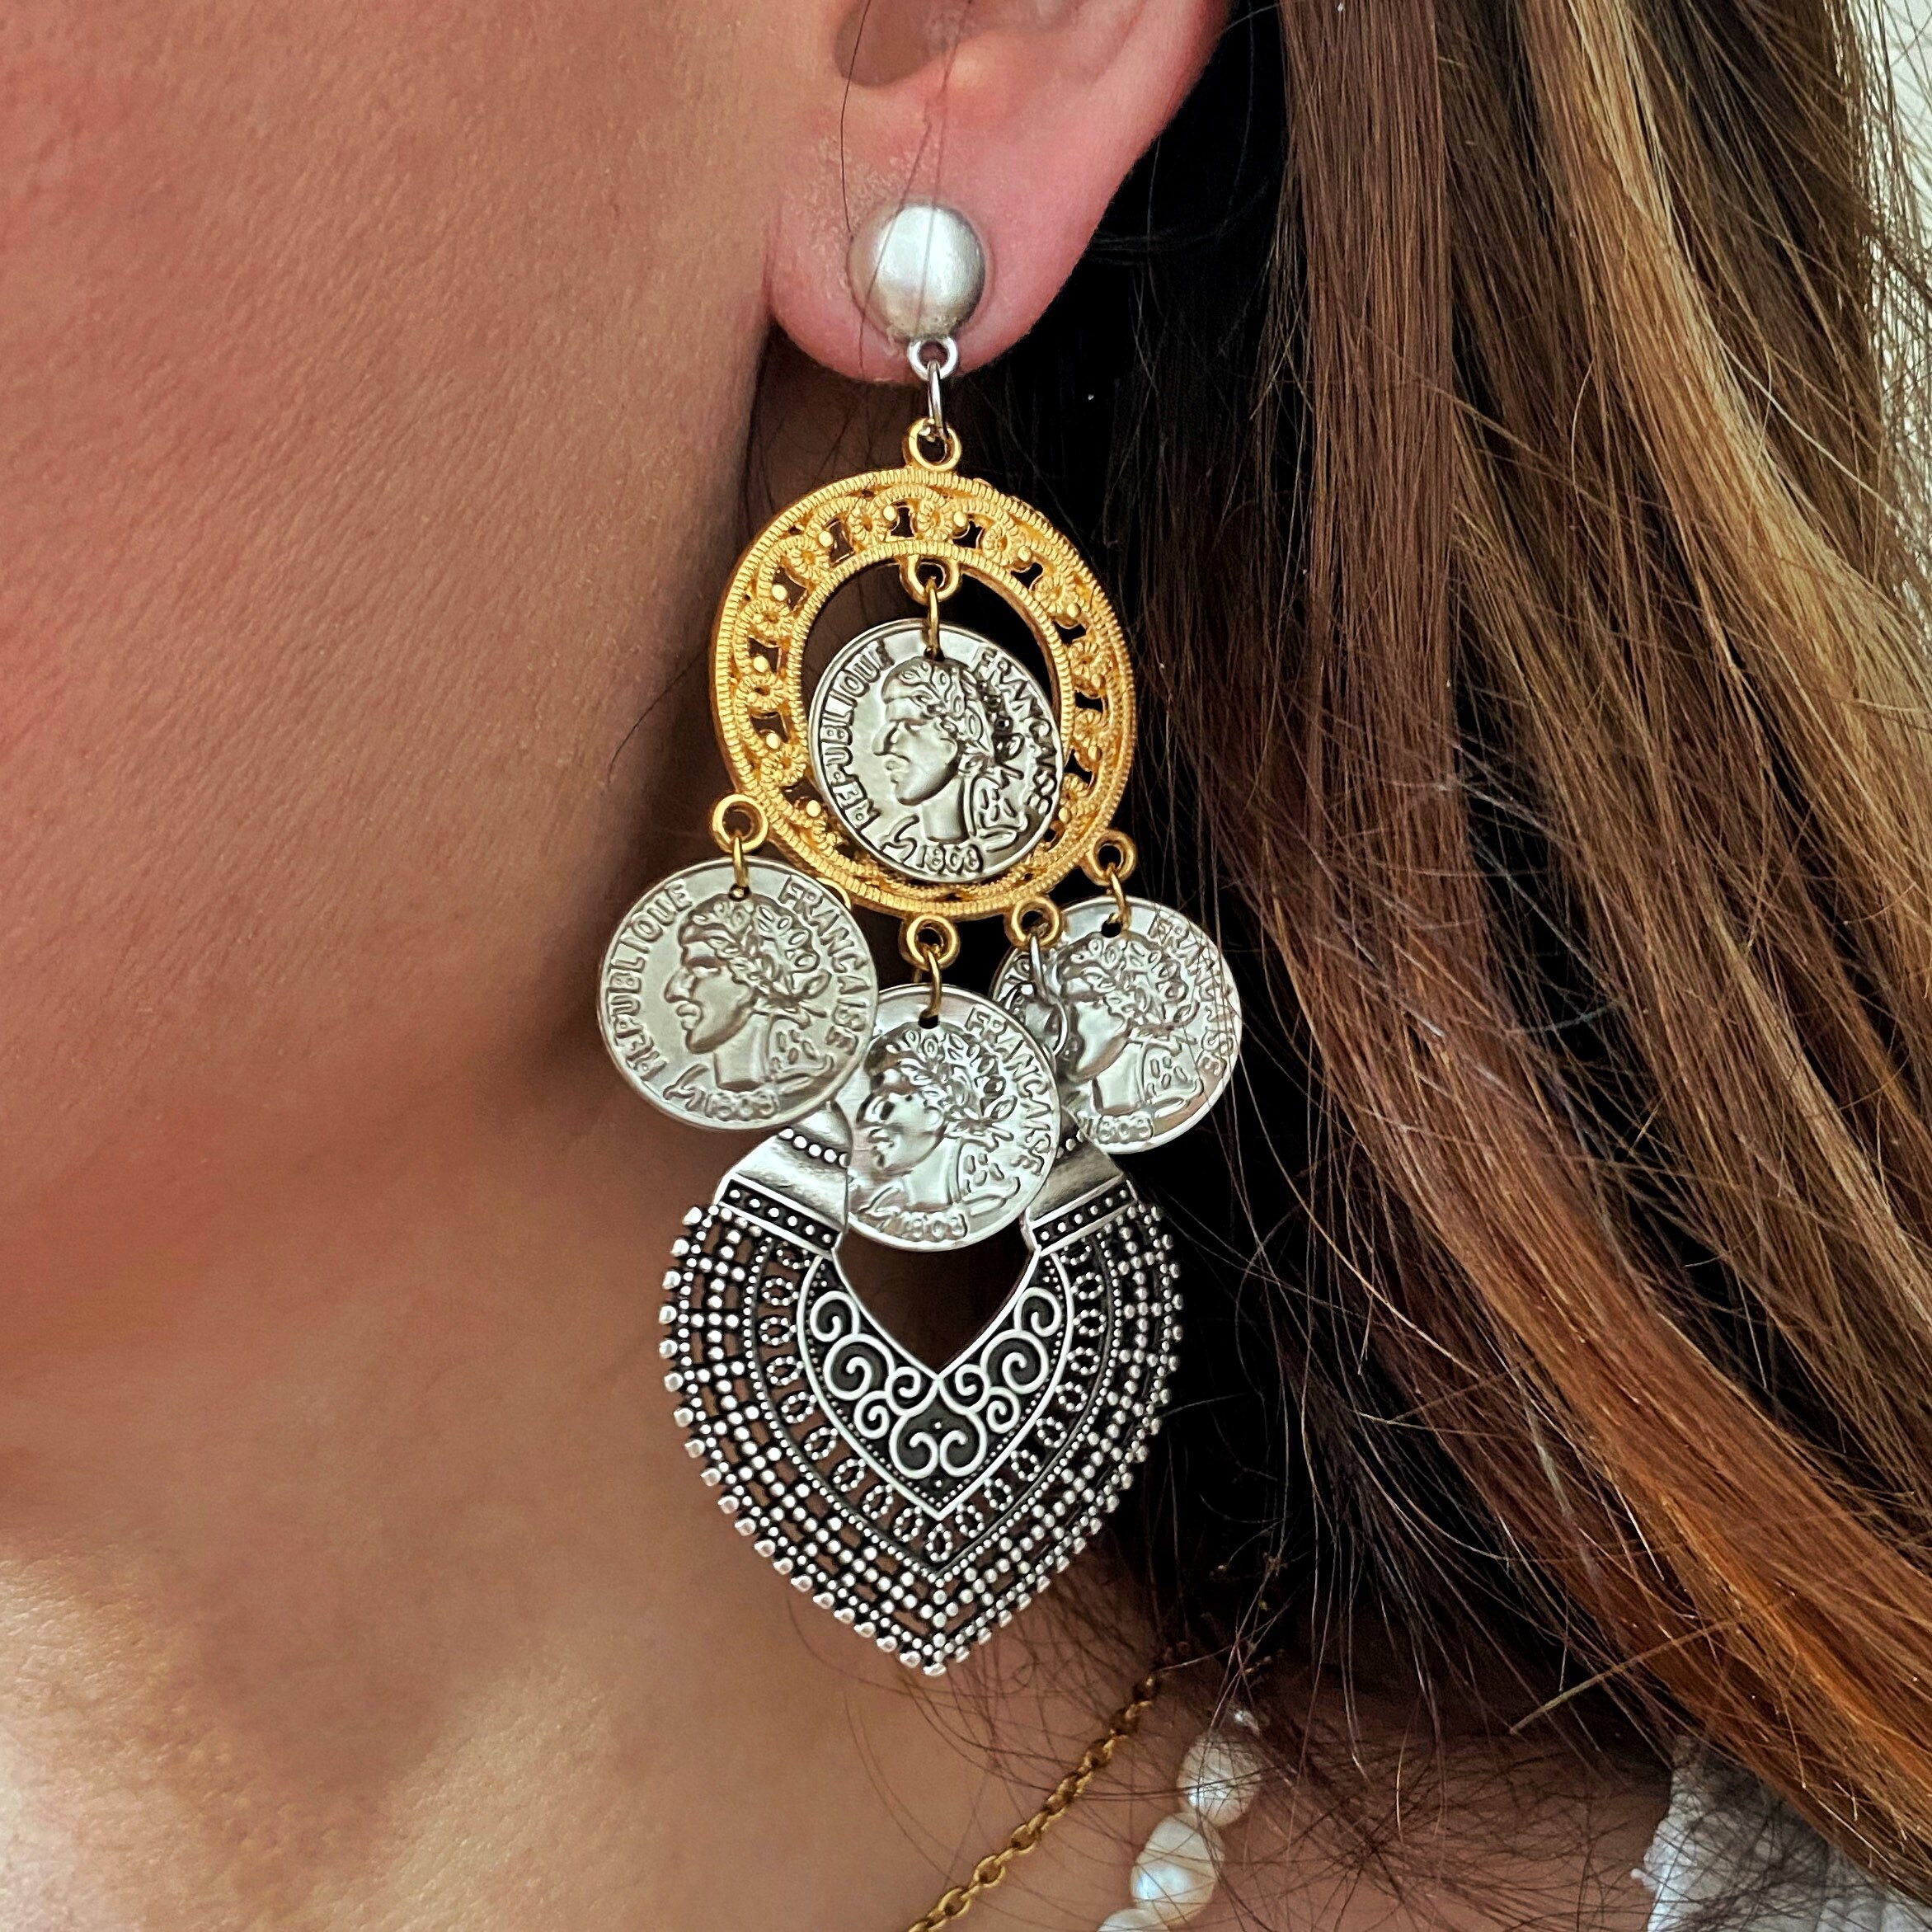 Keep It Gypsy, Upcycled GG Earrings, Western, Rodeo, Clear Crystals ,  Brown, Hoops, Earrings, Accessories – Zazzy Zebra Boutique